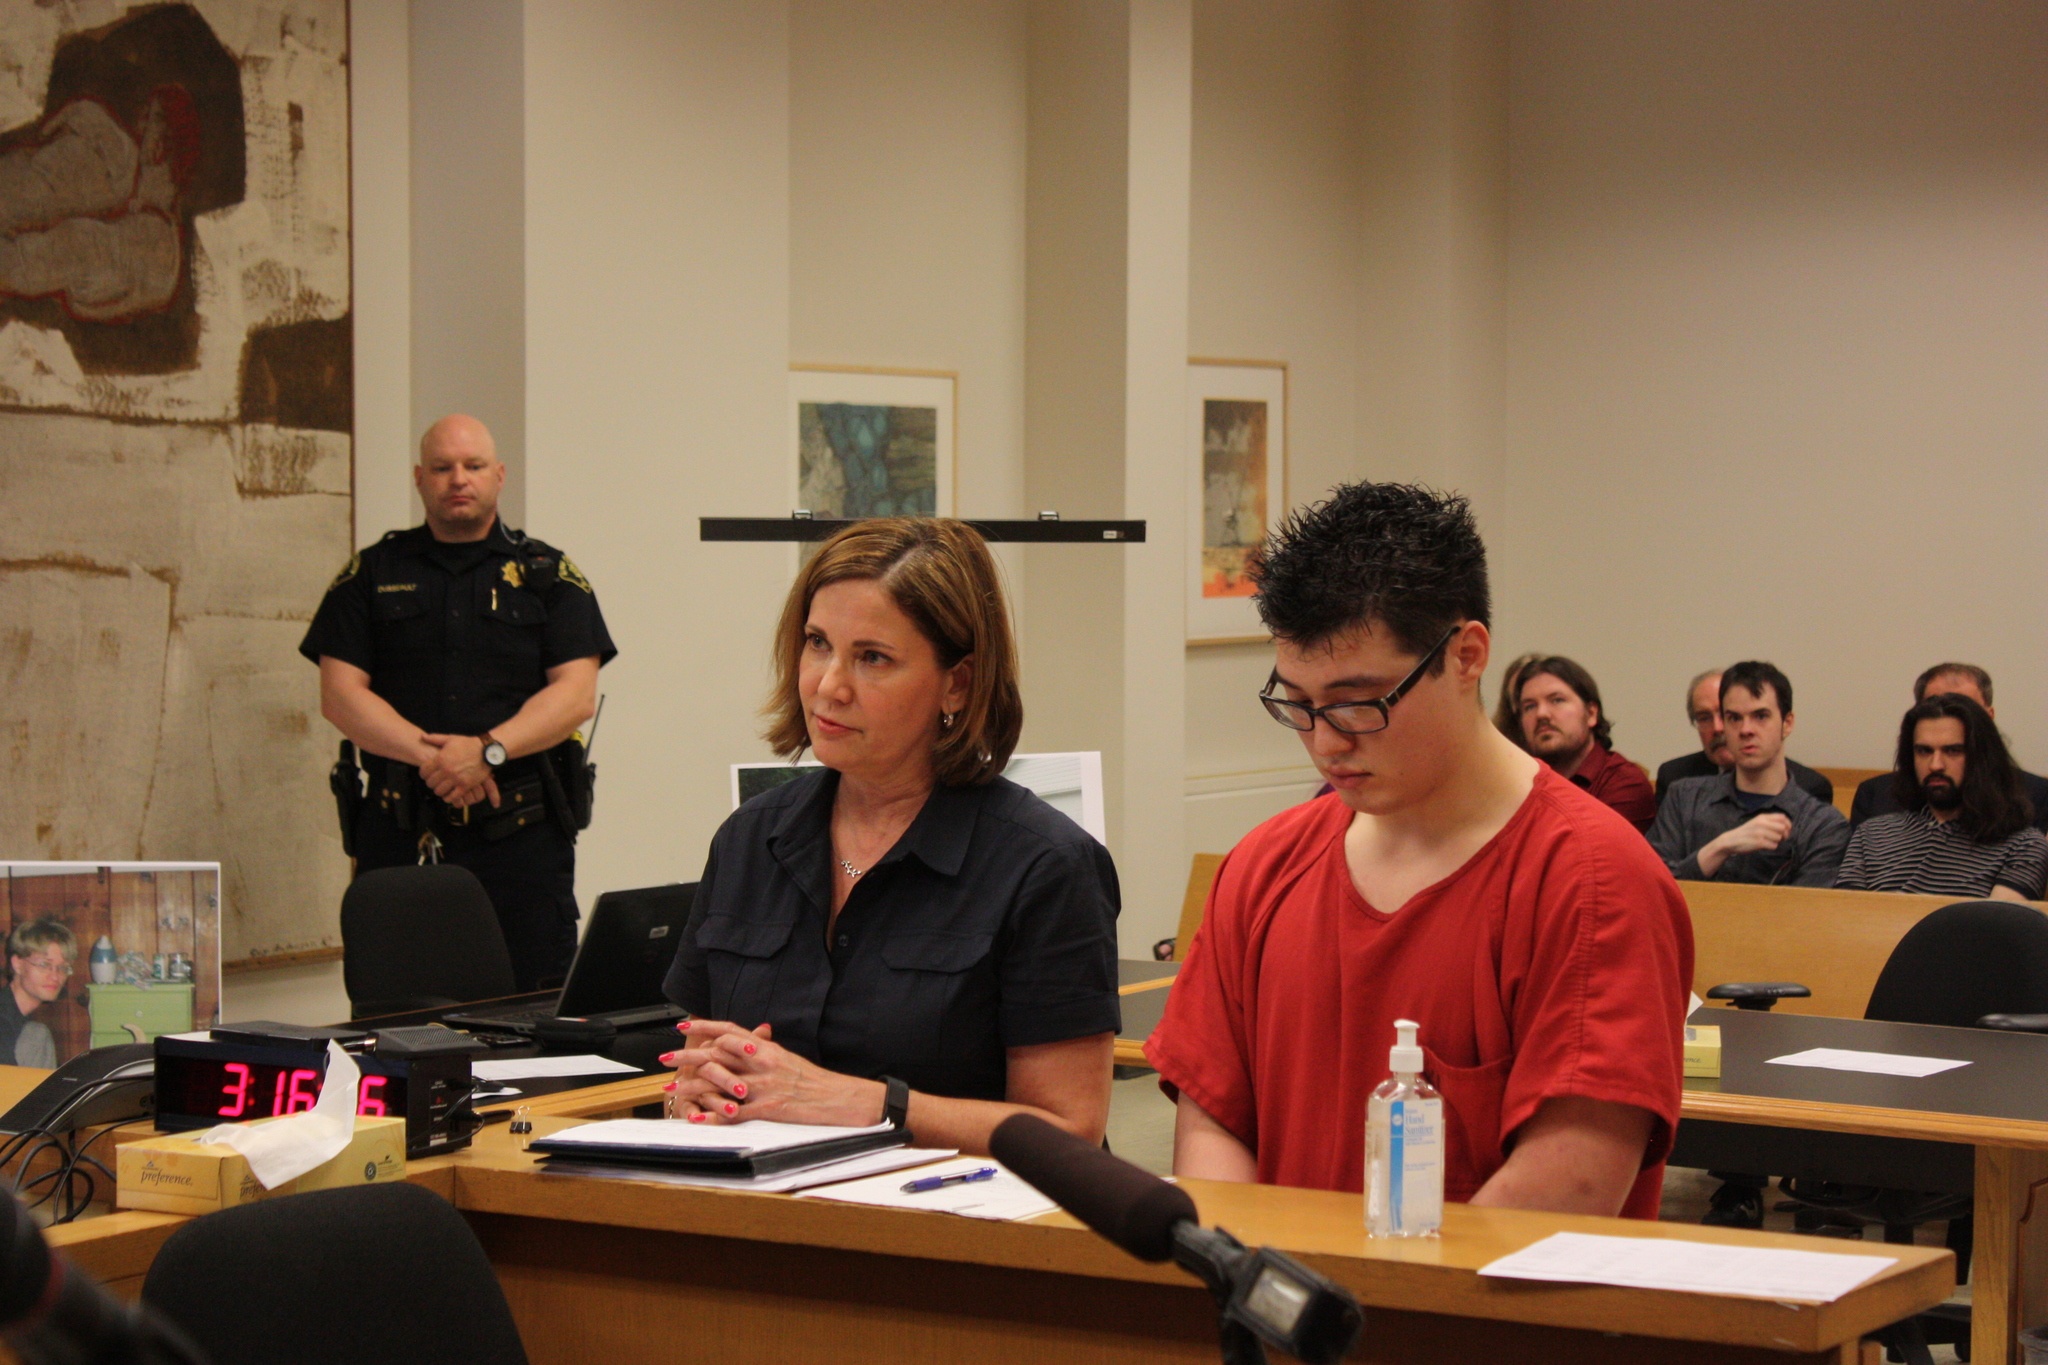 Robert Malsch faces Judge Mary Roberts with his attorney Colleen Hartl in court on Friday afternoon. Samantha Pak